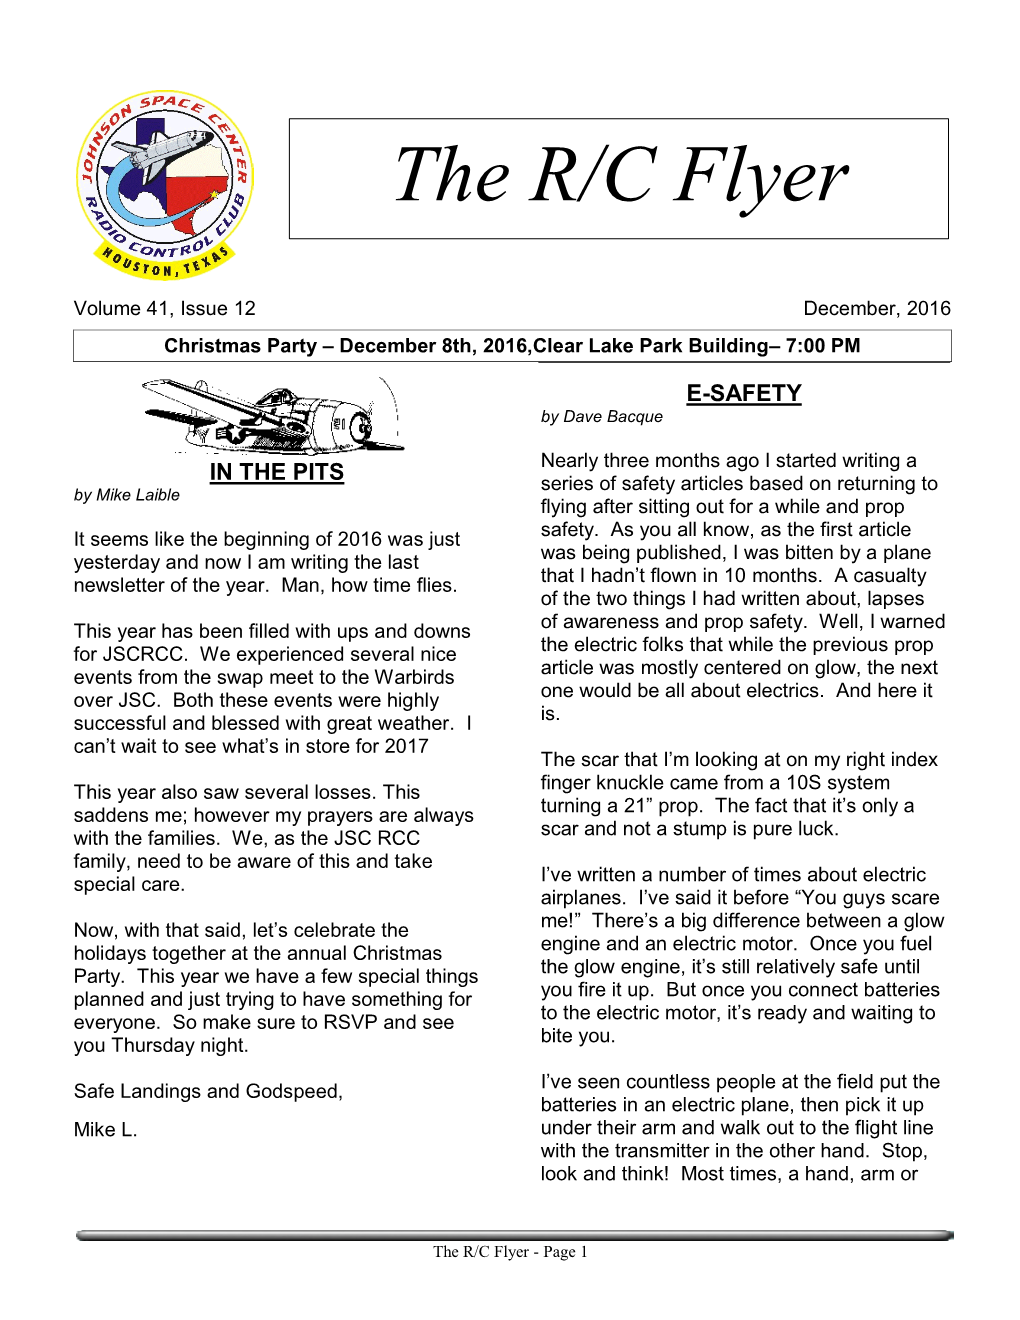 The R/C Flyer